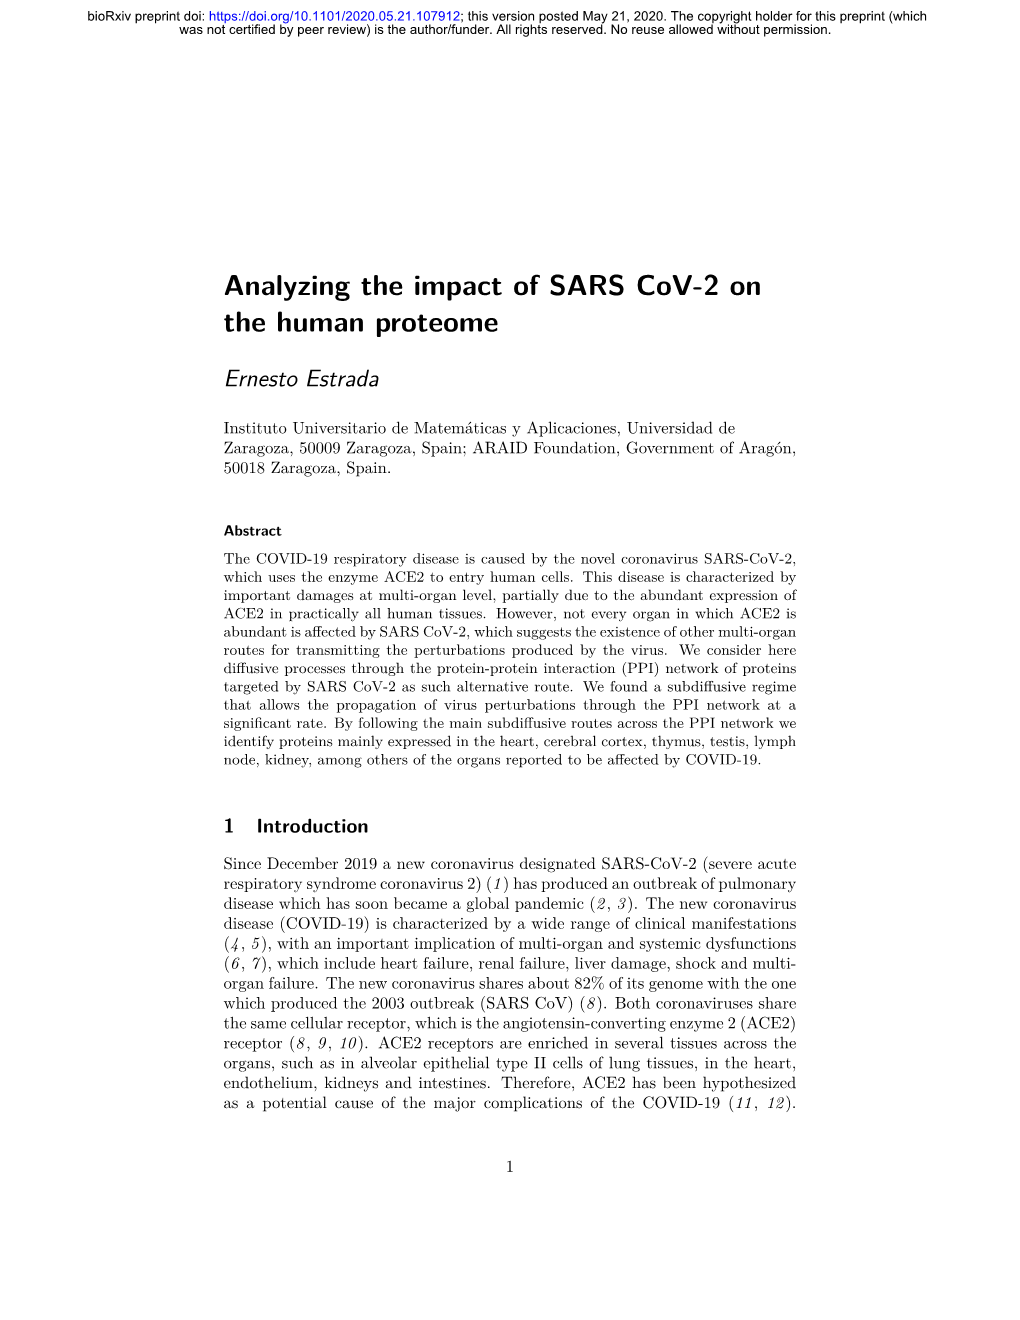 Analyzing the Impact of SARS Cov-2 on the Human Proteome